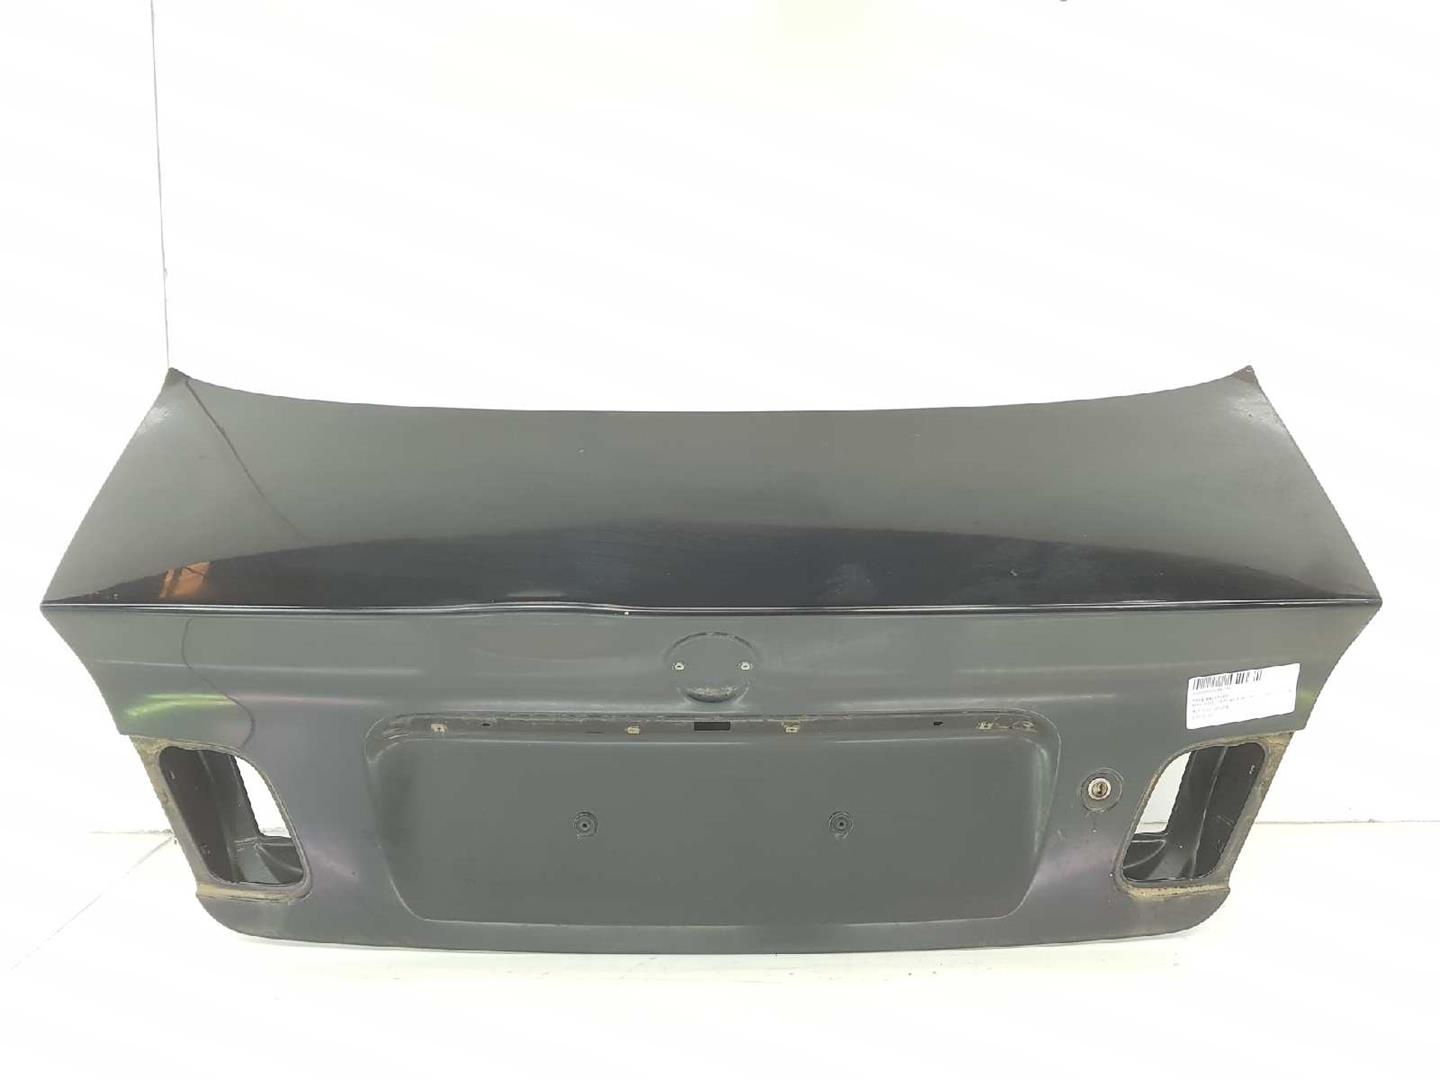 BMW 3 Series E46 (1997-2006) Bootlid Rear Boot 41627003314, 41627003314 19618586